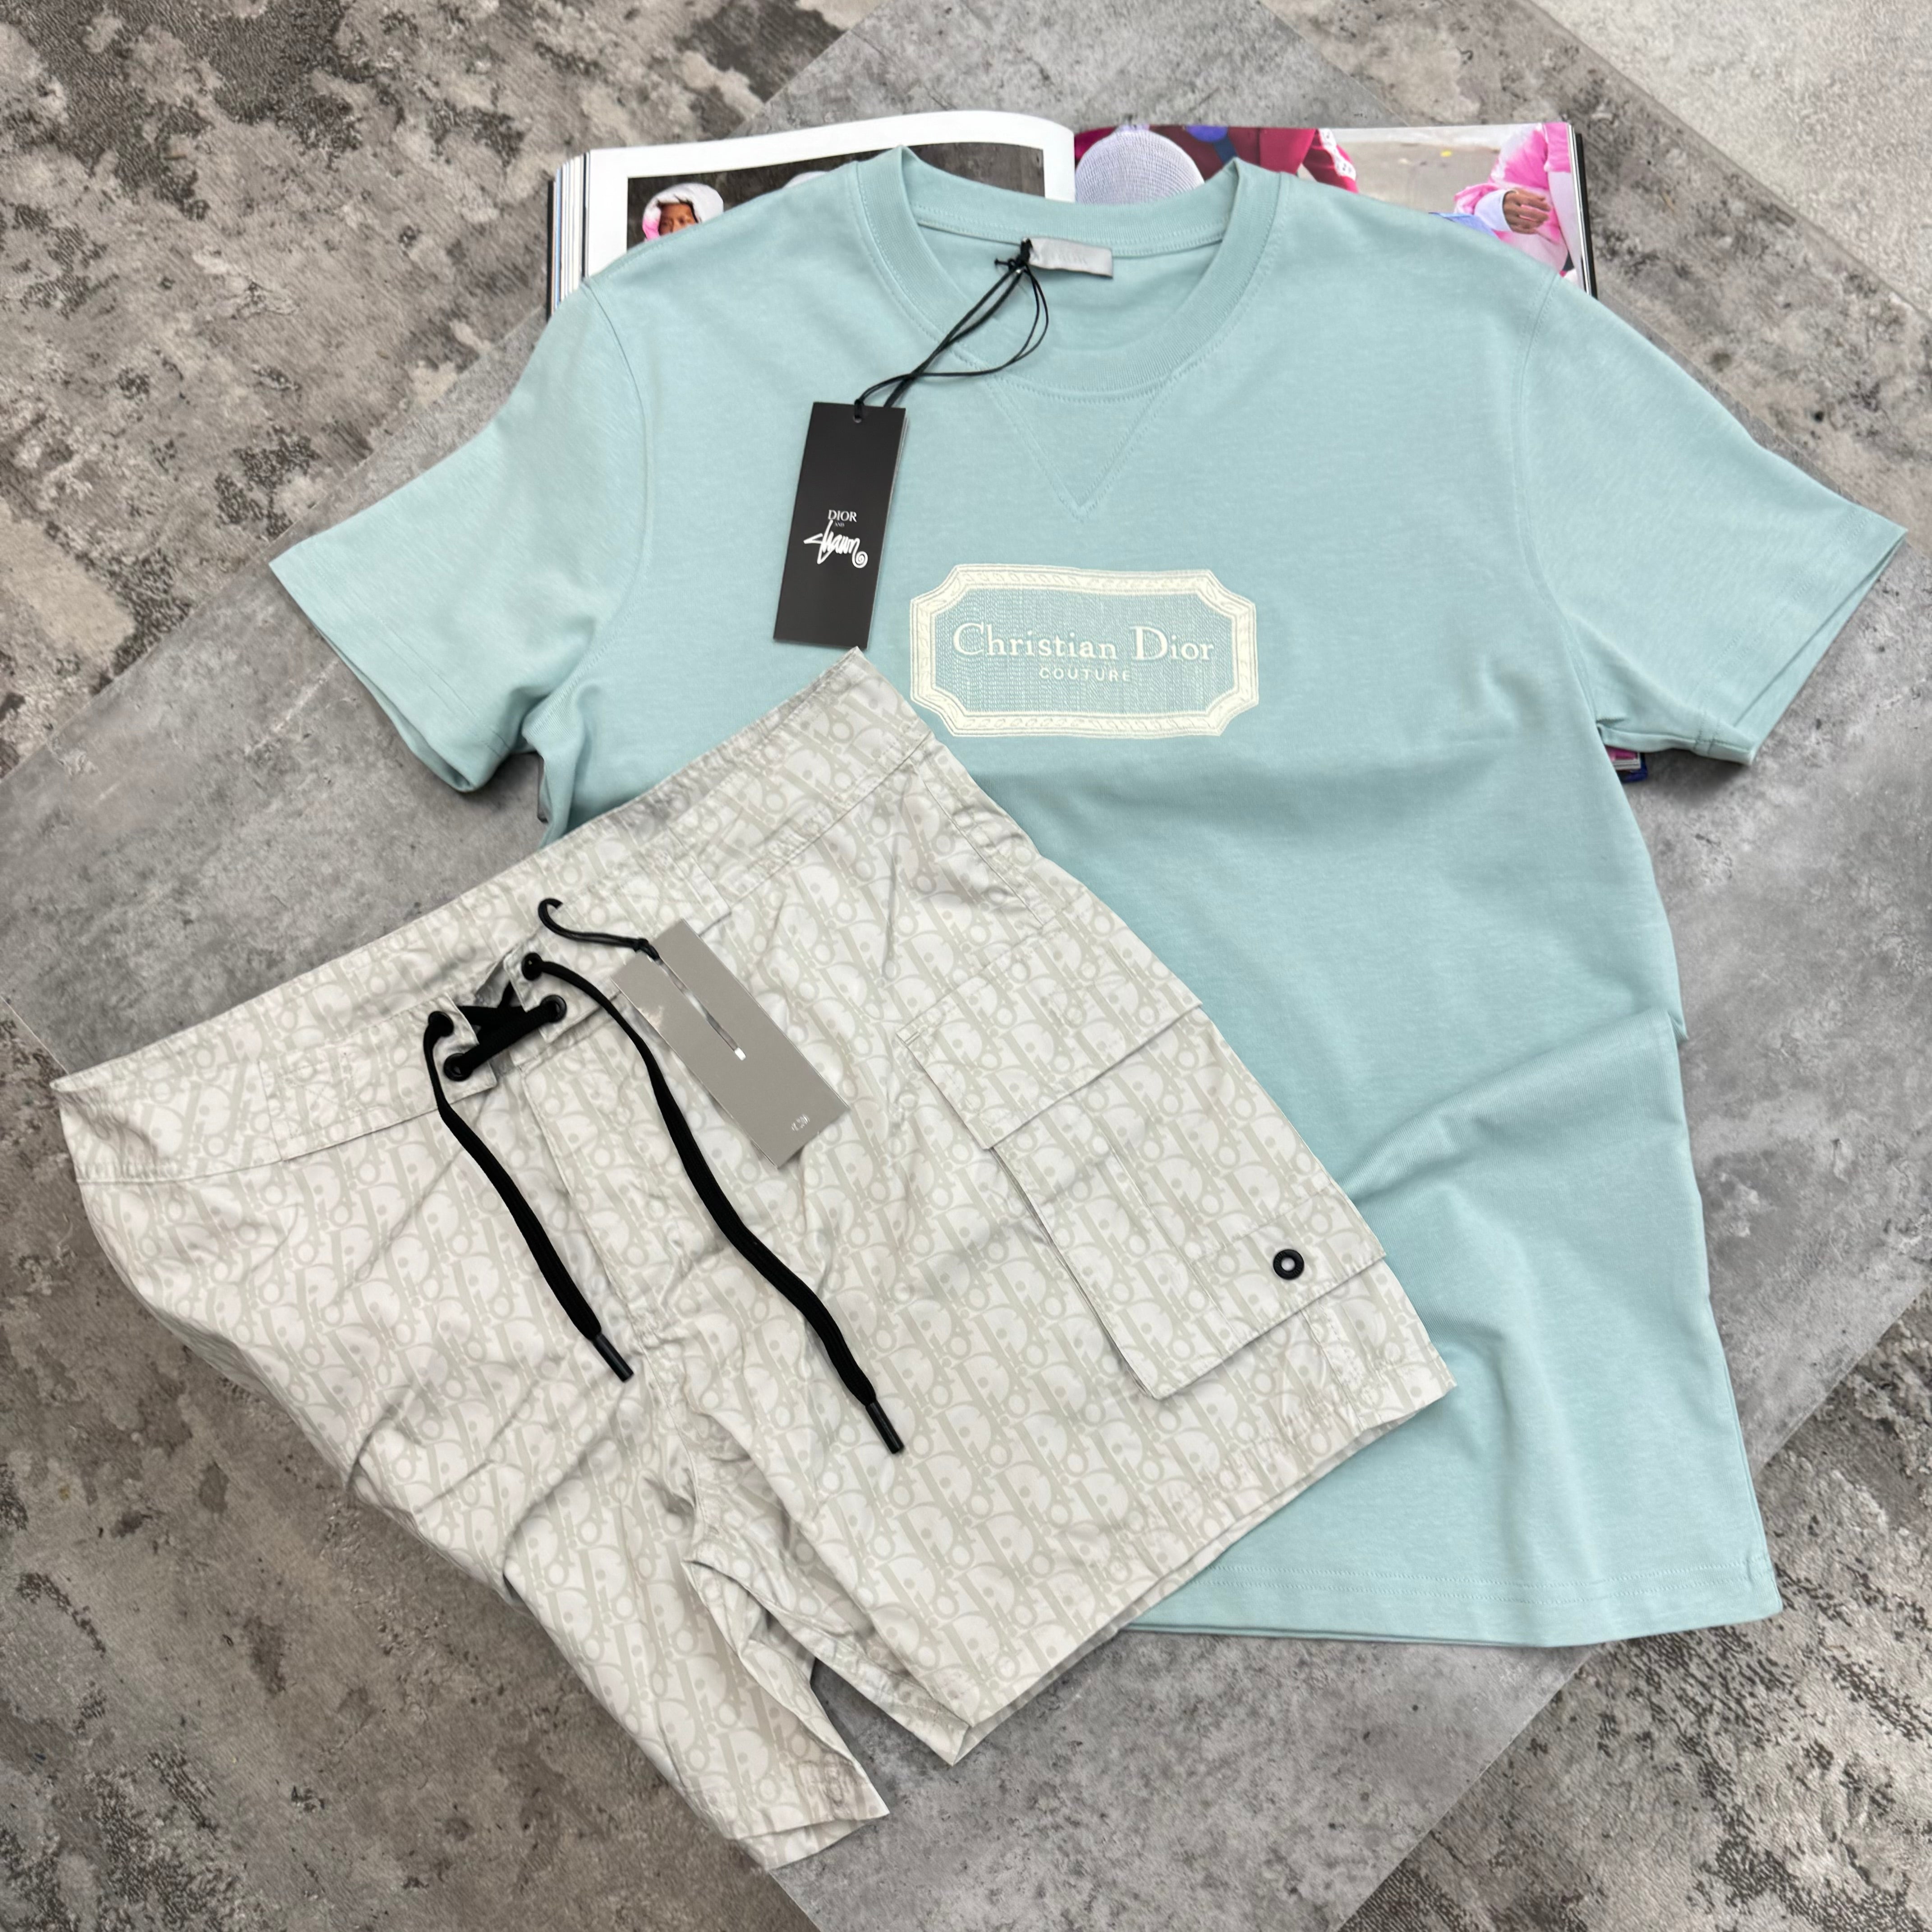 DIOR - COUTURE T-SHIRT - TEAL